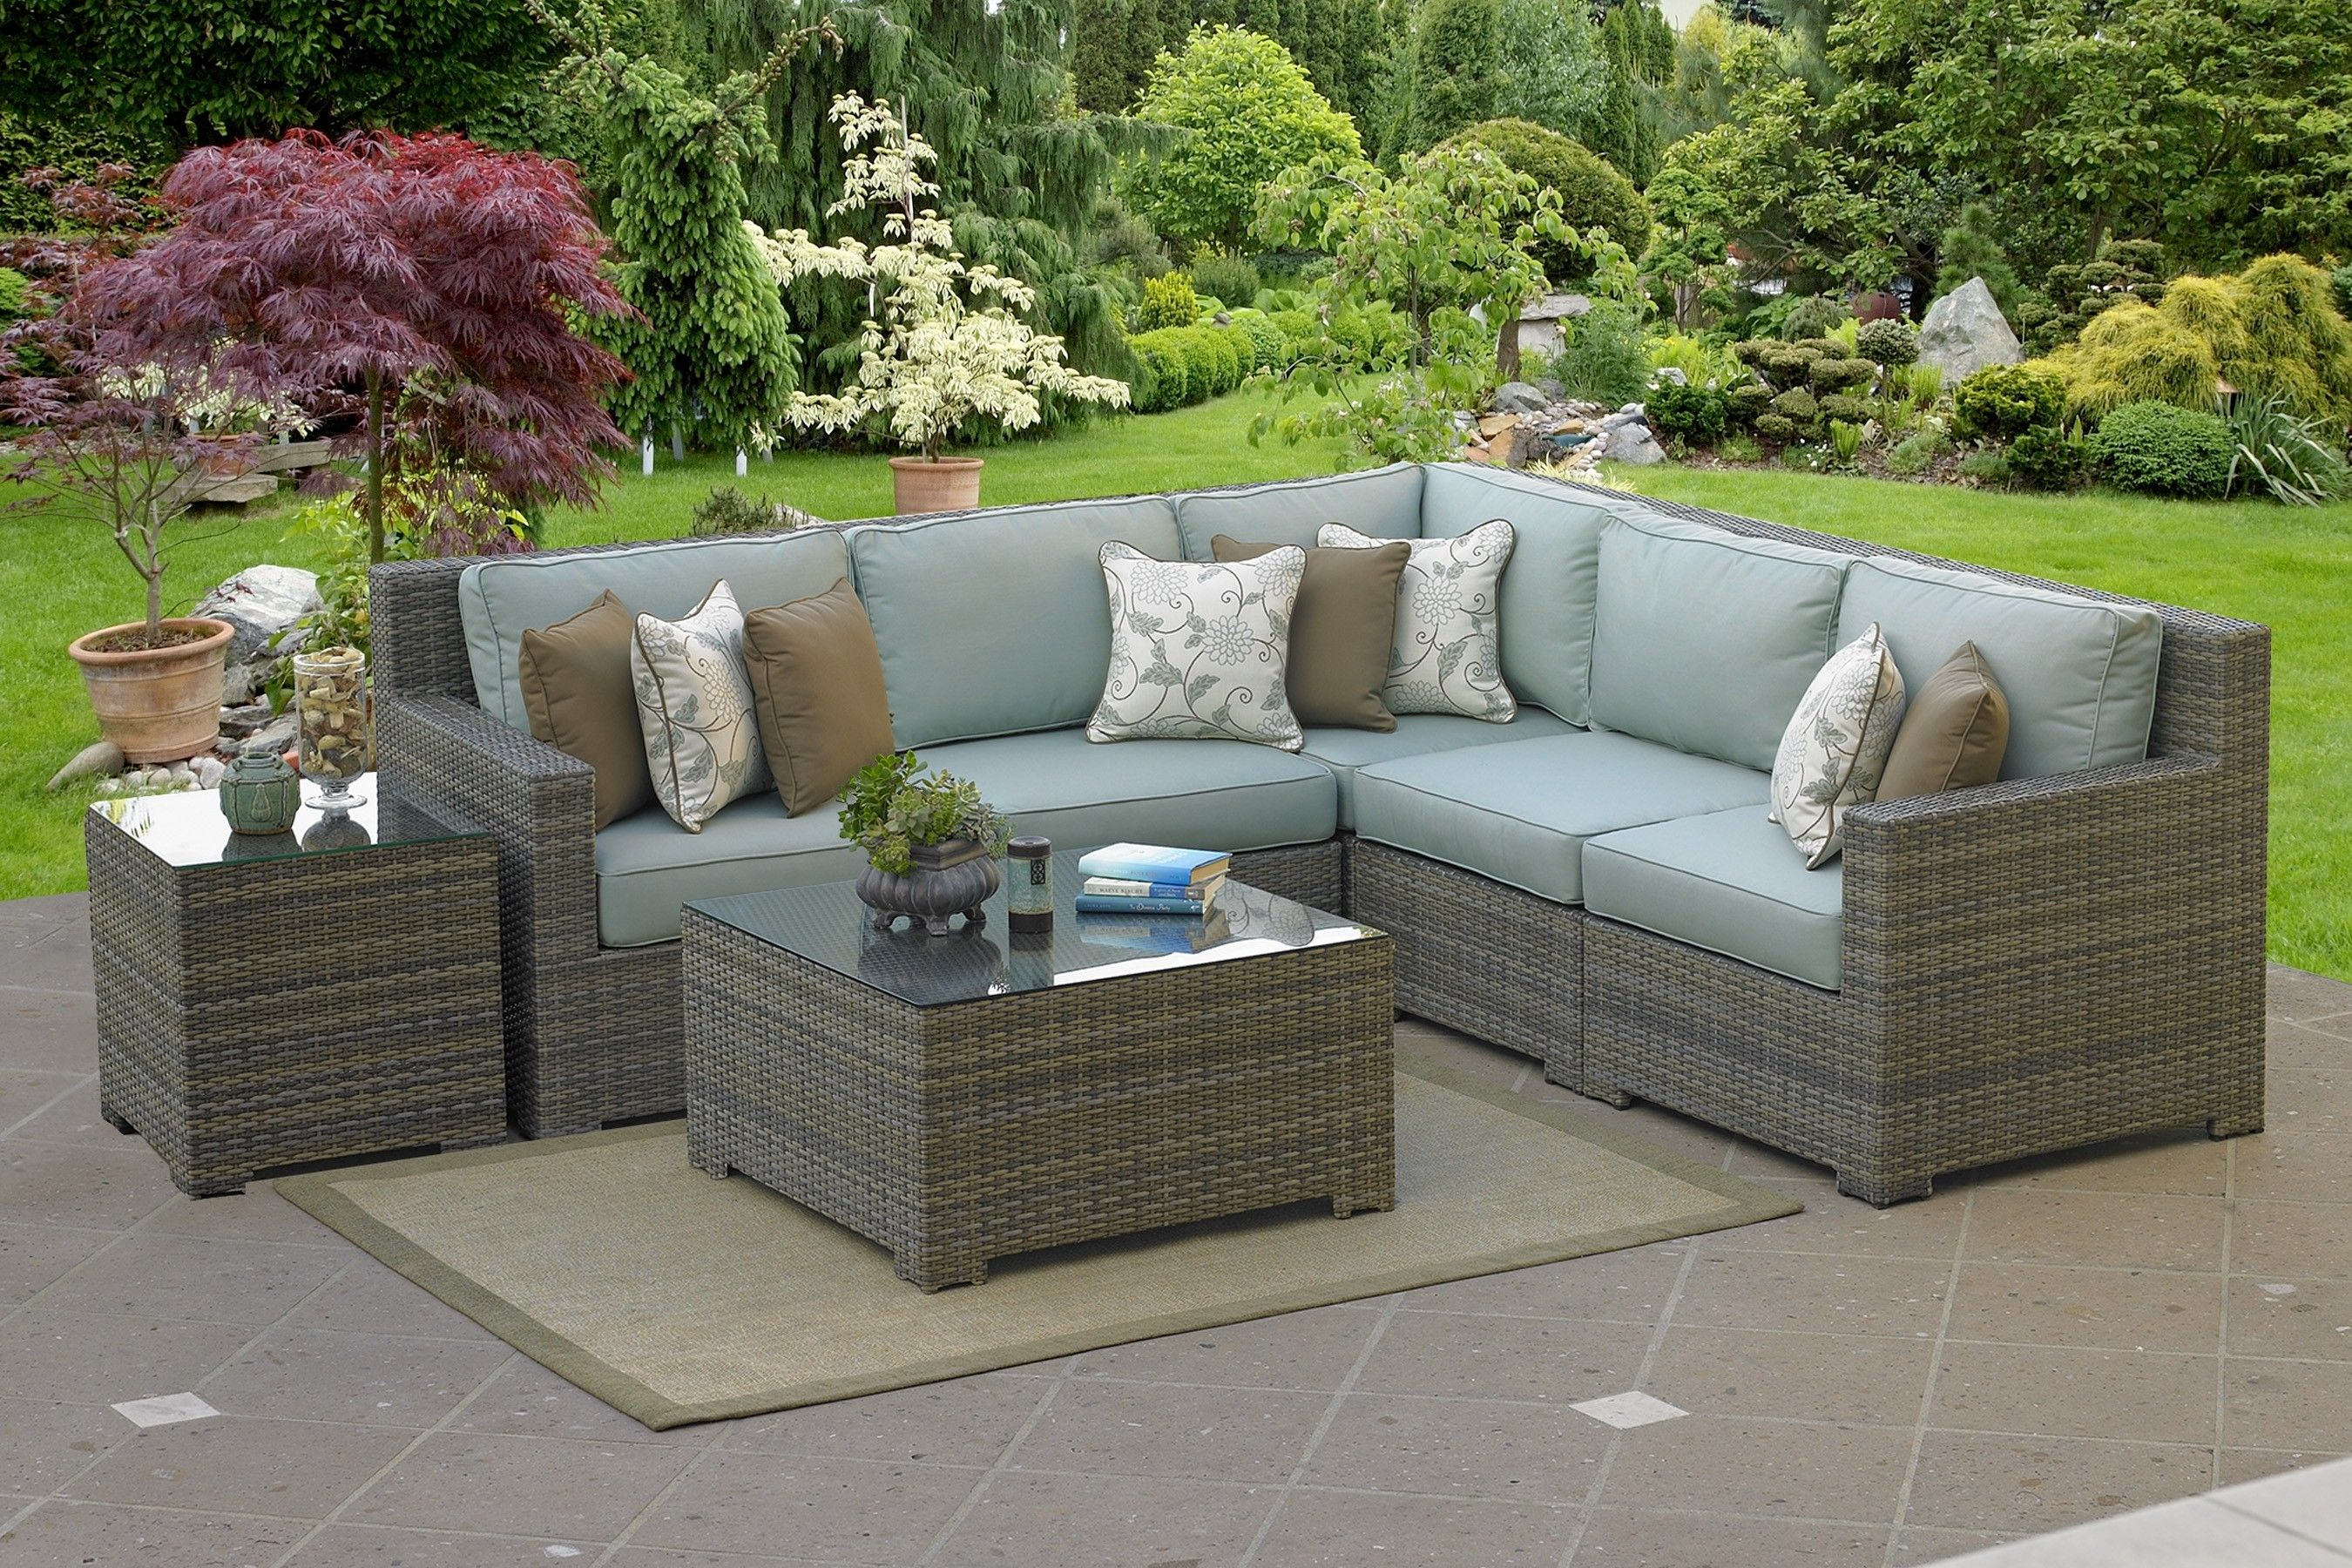 Malibu High Back 5 Pc Outdoor L Sectional 90 Degree Teak throughout sizing 2700 X 1800